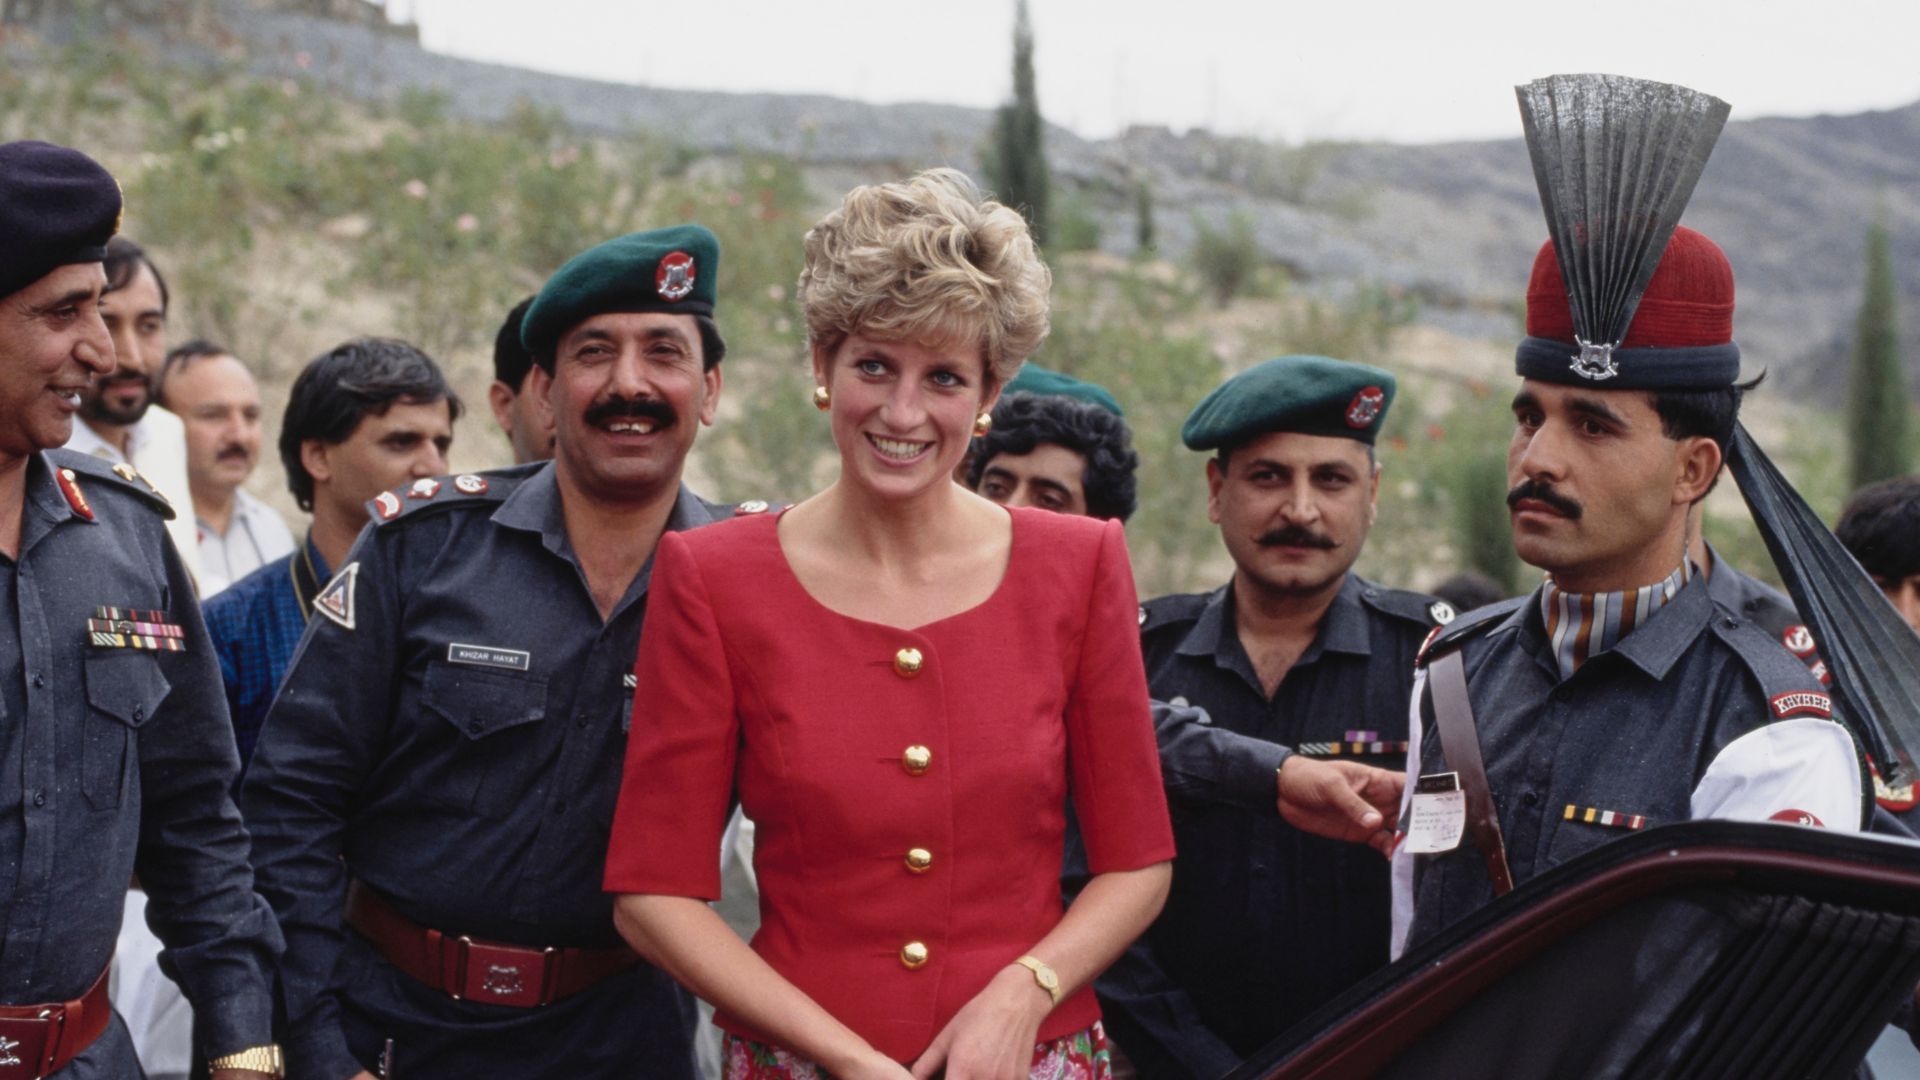 <p>                     The set of images from Diana’s time at Pakistan’s Khyber Pass exode pure joy as she jokes around with military police from the Khyber Rifles Regiment, part of the Frontier Corps. The mountain pass that links Afghanistan and Pakistan was a stopping point during her 1991 trip but the Princess of Wales loved Pakistan so much she travelled to the country twice more in 1996 and 1997.                   </p>